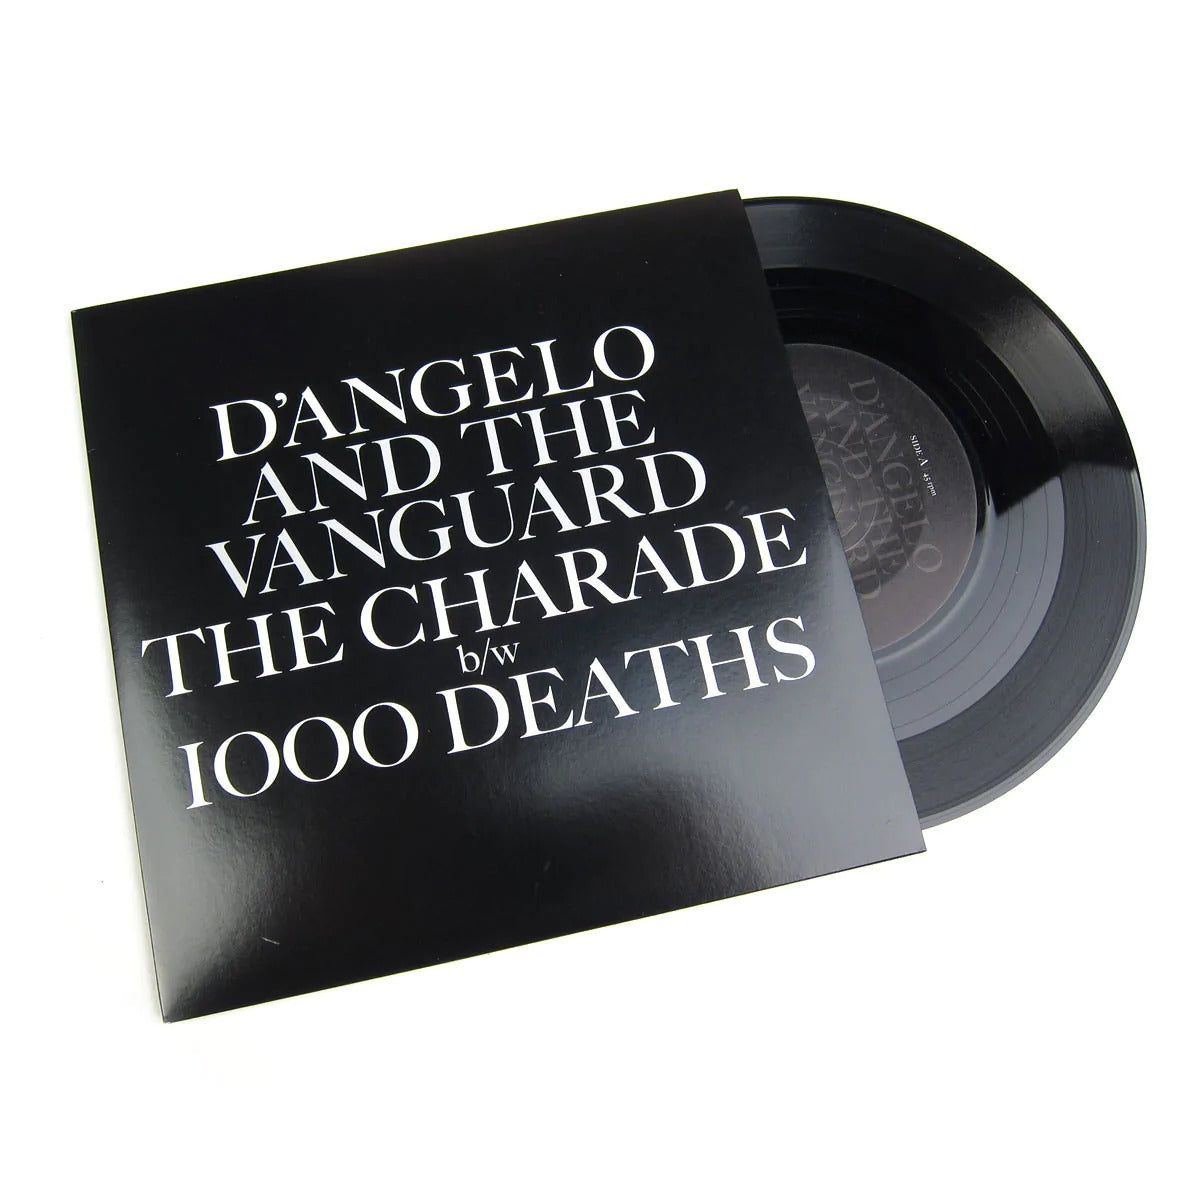 D'Angelo & The Vanguard - The Charade b/w 1000 Deaths 7" (RSD Exclusive, Limited to 4000)